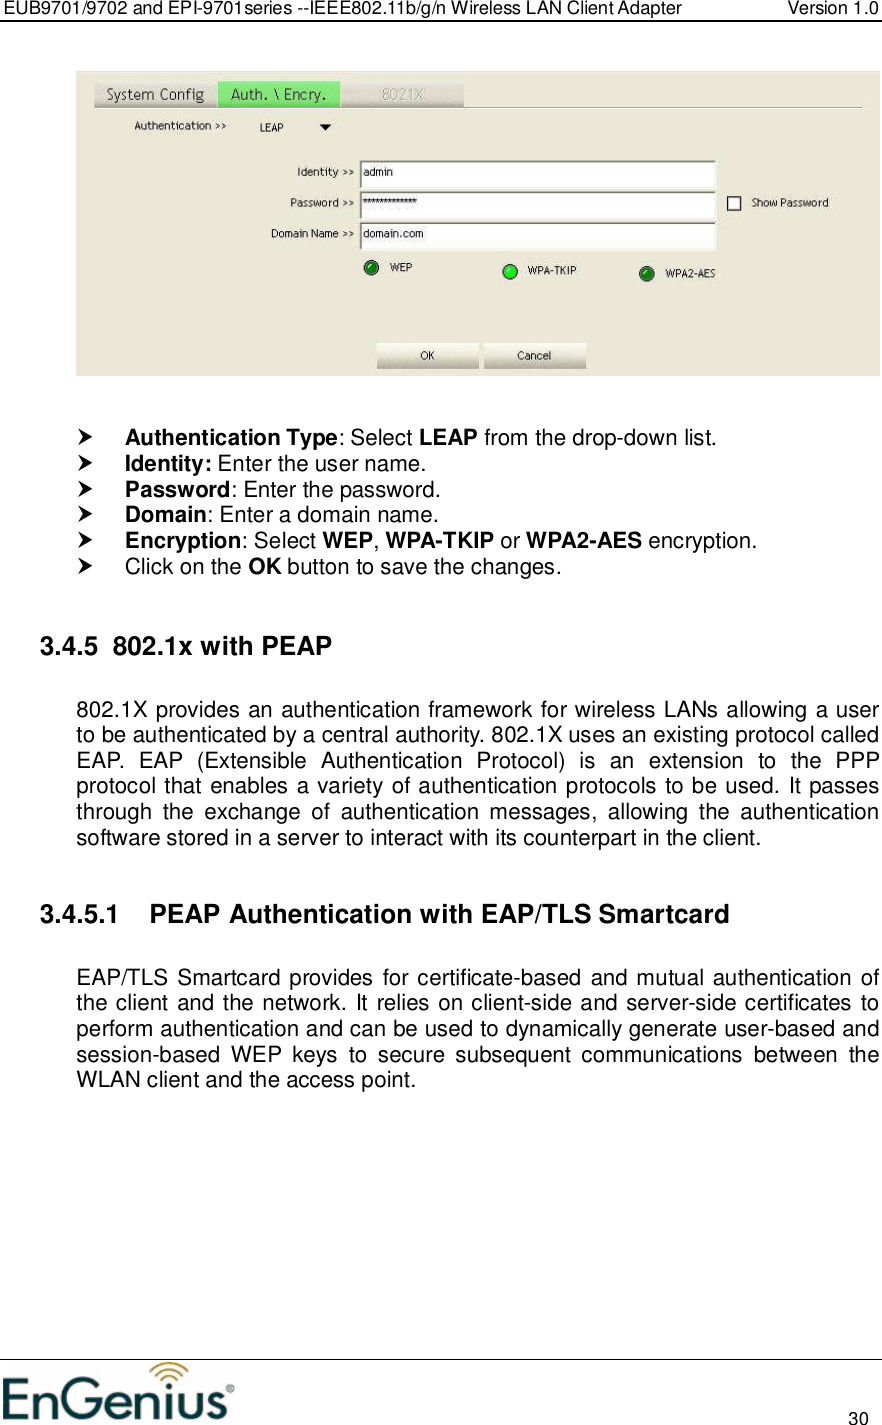 EUB9701/9702 and EPI-9701series --IEEE802.11b/g/n Wireless LAN Client Adapter  Version 1.0                                                                                                                          30      Authentication Type: Select LEAP from the drop-down list.   Identity: Enter the user name.  Password: Enter the password.  Domain: Enter a domain name.  Encryption: Select WEP, WPA-TKIP or WPA2-AES encryption.   Click on the OK button to save the changes.   3.4.5  802.1x with PEAP  802.1X provides an authentication framework for wireless LANs allowing a user to be authenticated by a central authority. 802.1X uses an existing protocol called EAP.  EAP  (Extensible  Authentication  Protocol)  is  an  extension  to  the  PPP protocol that enables a variety of authentication protocols to be used. It passes through  the  exchange  of  authentication  messages,  allowing  the  authentication software stored in a server to interact with its counterpart in the client.  3.4.5.1  PEAP Authentication with EAP/TLS Smartcard  EAP/TLS Smartcard provides for certificate-based and mutual authentication of the client and the network. It relies on client-side and server-side certificates to perform authentication and can be used to dynamically generate user-based and session-based  WEP  keys  to  secure  subsequent  communications  between  the WLAN client and the access point.  